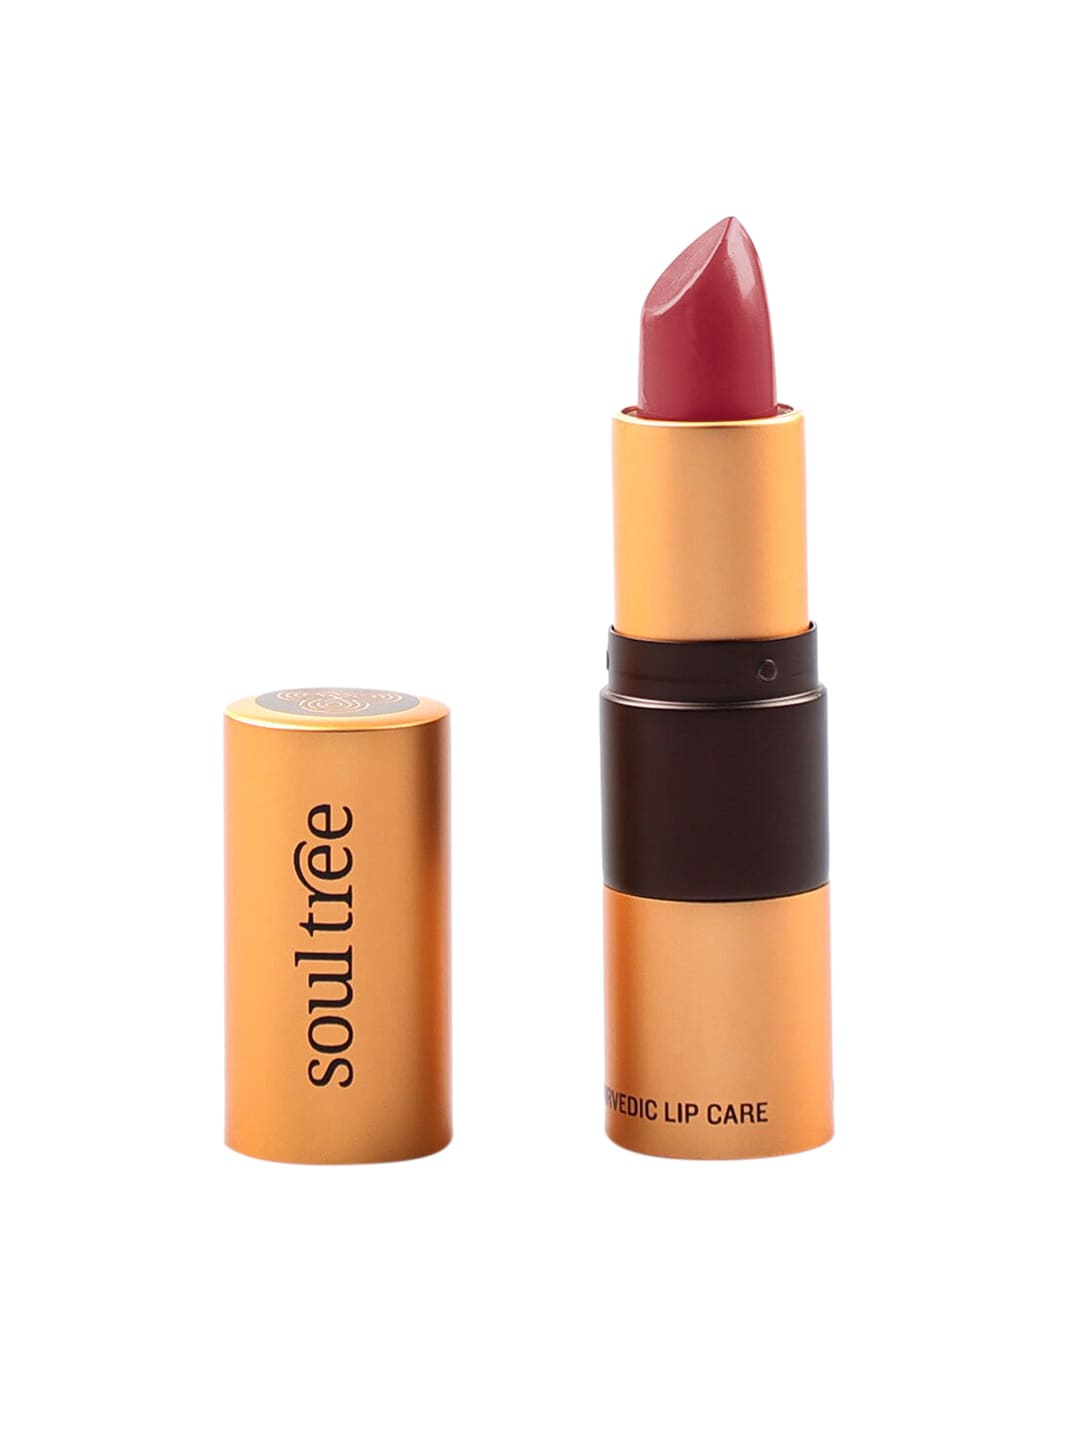 Soultree Ayurvedic Lipstick Candy Floss 636 - 4gm Price in India